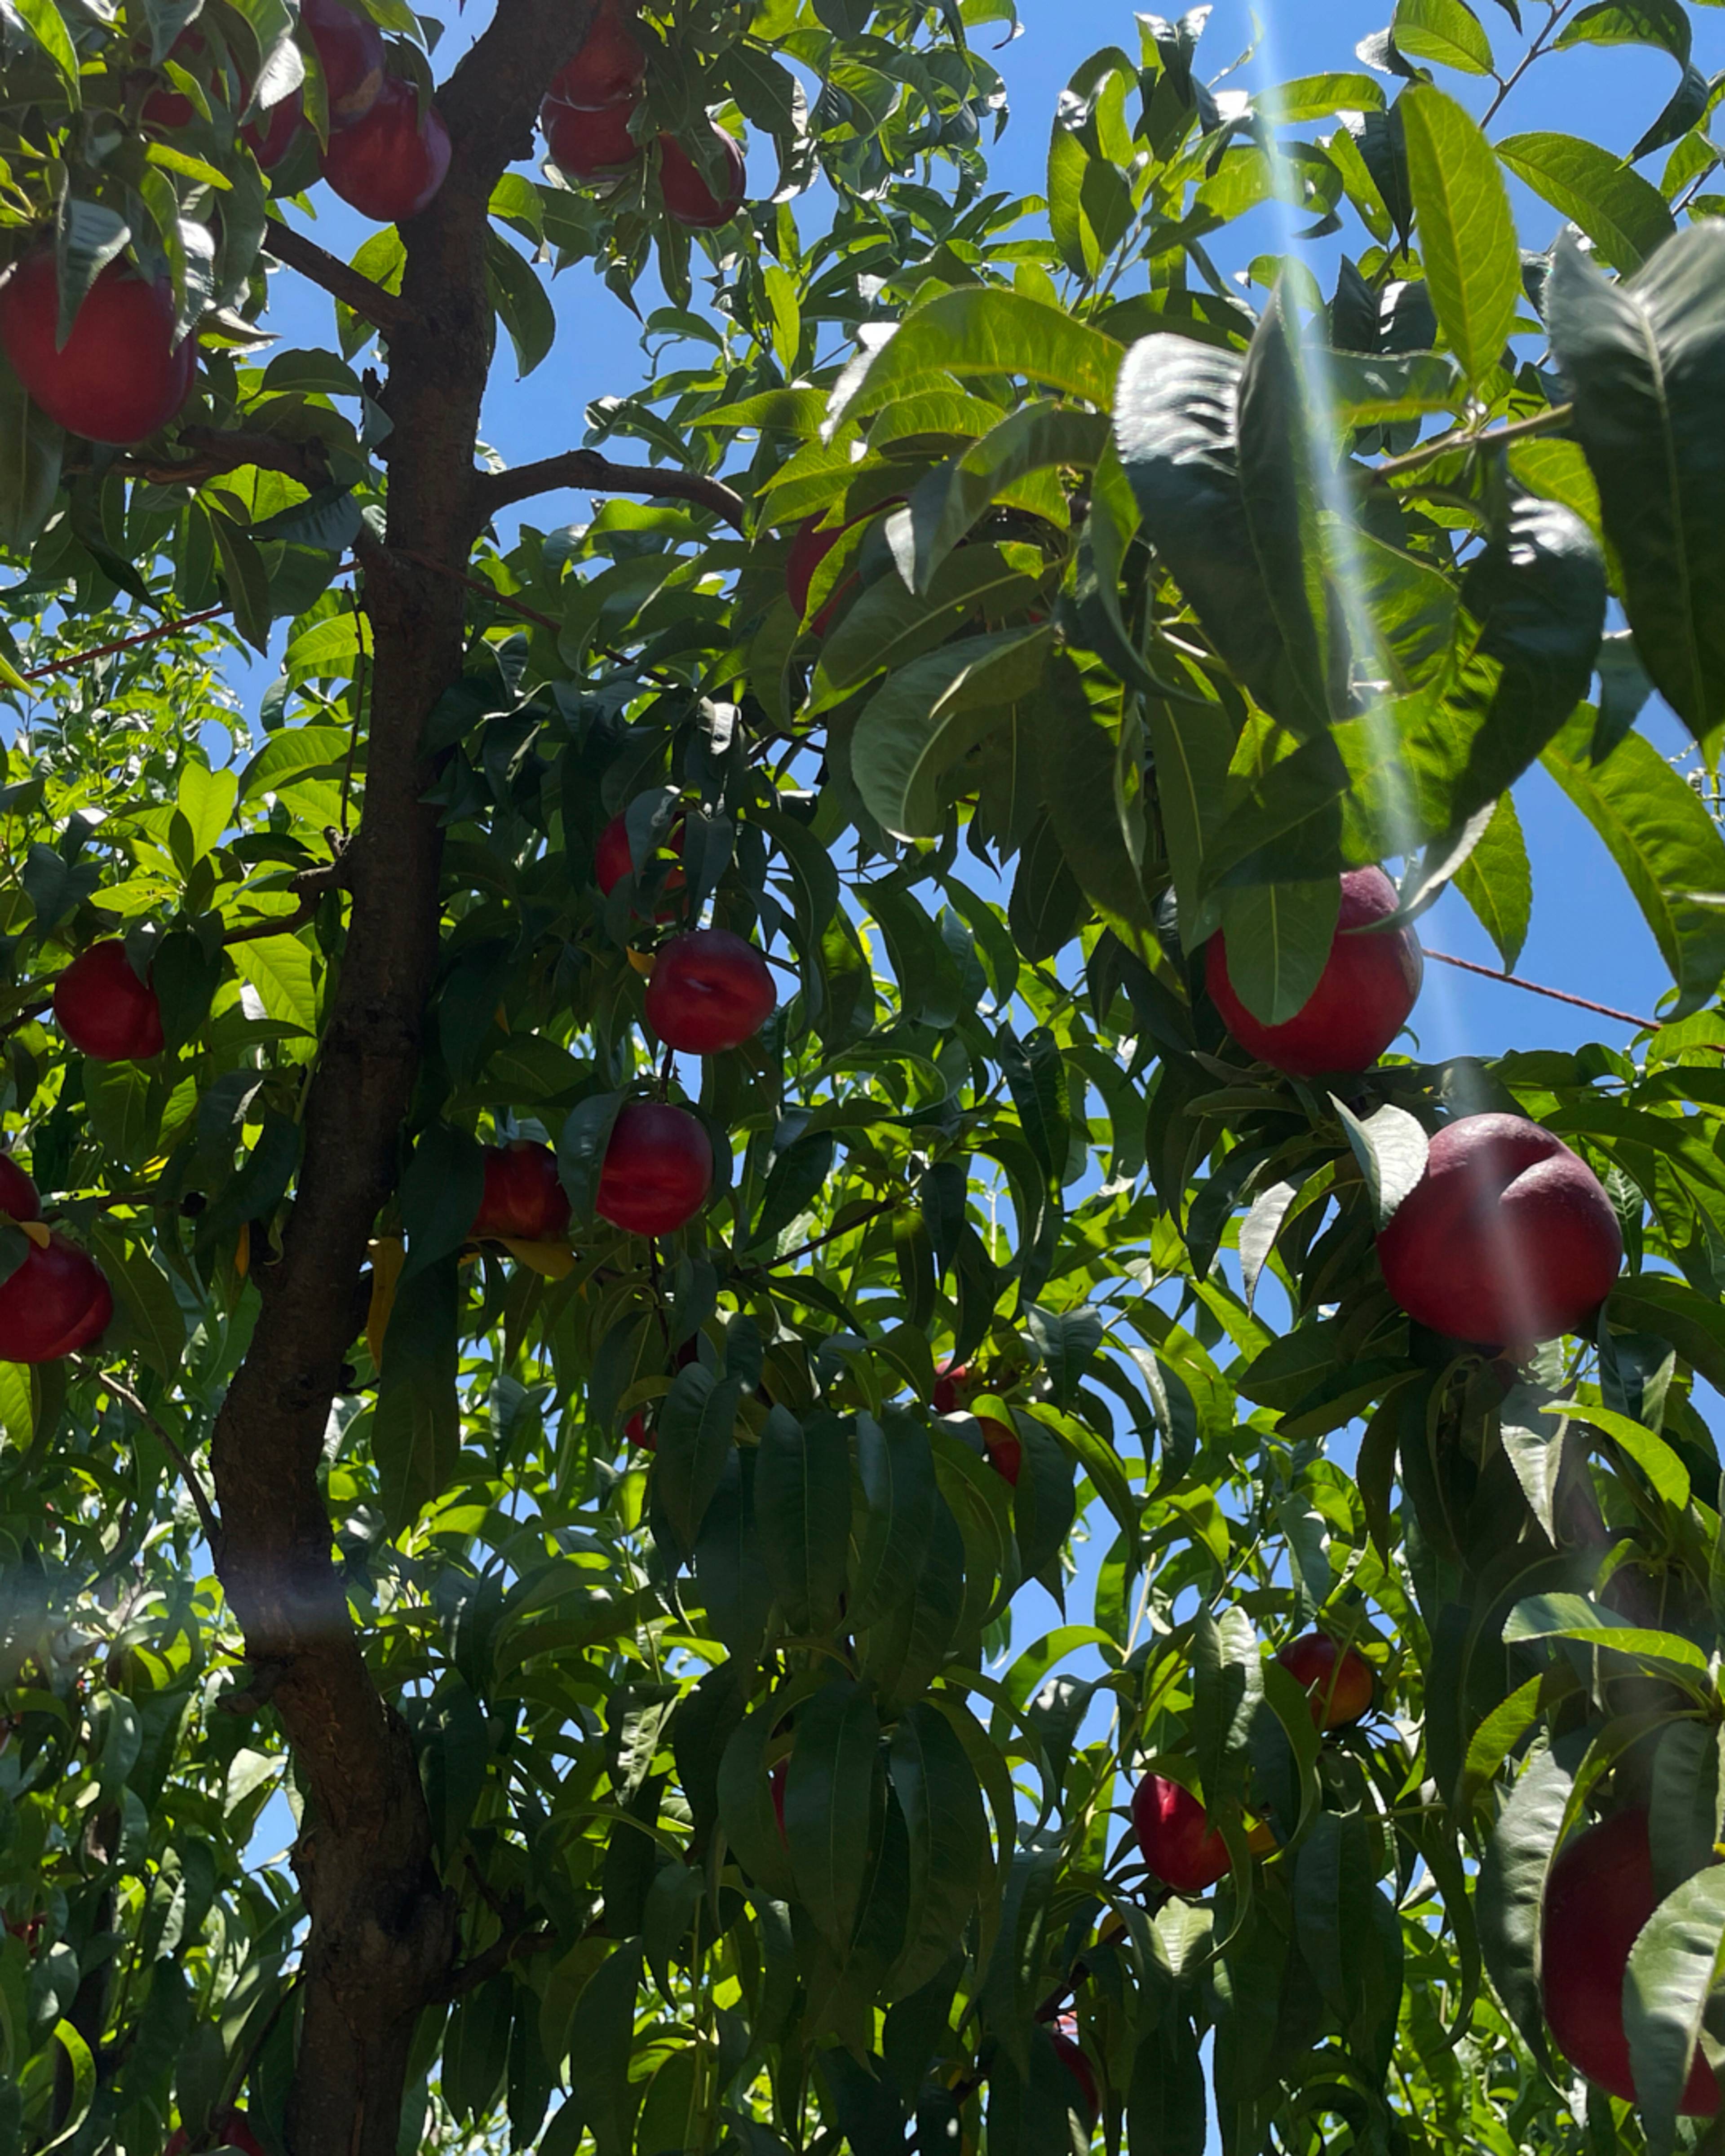 nectarines growing on the tree